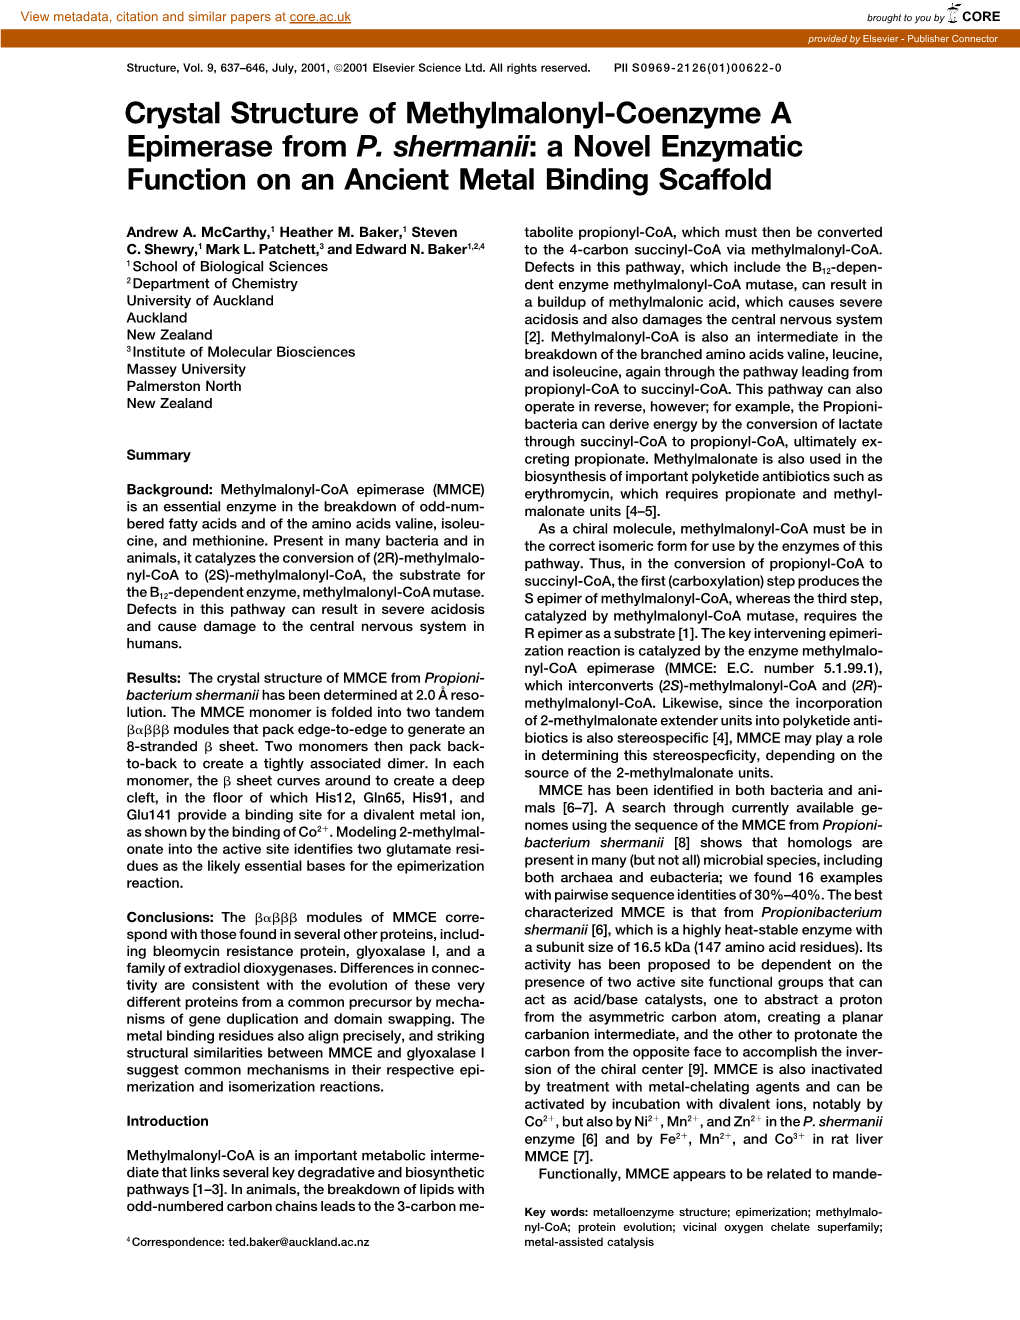 A Novel Enzymatic Function on an Ancient Metal Binding Scaffold